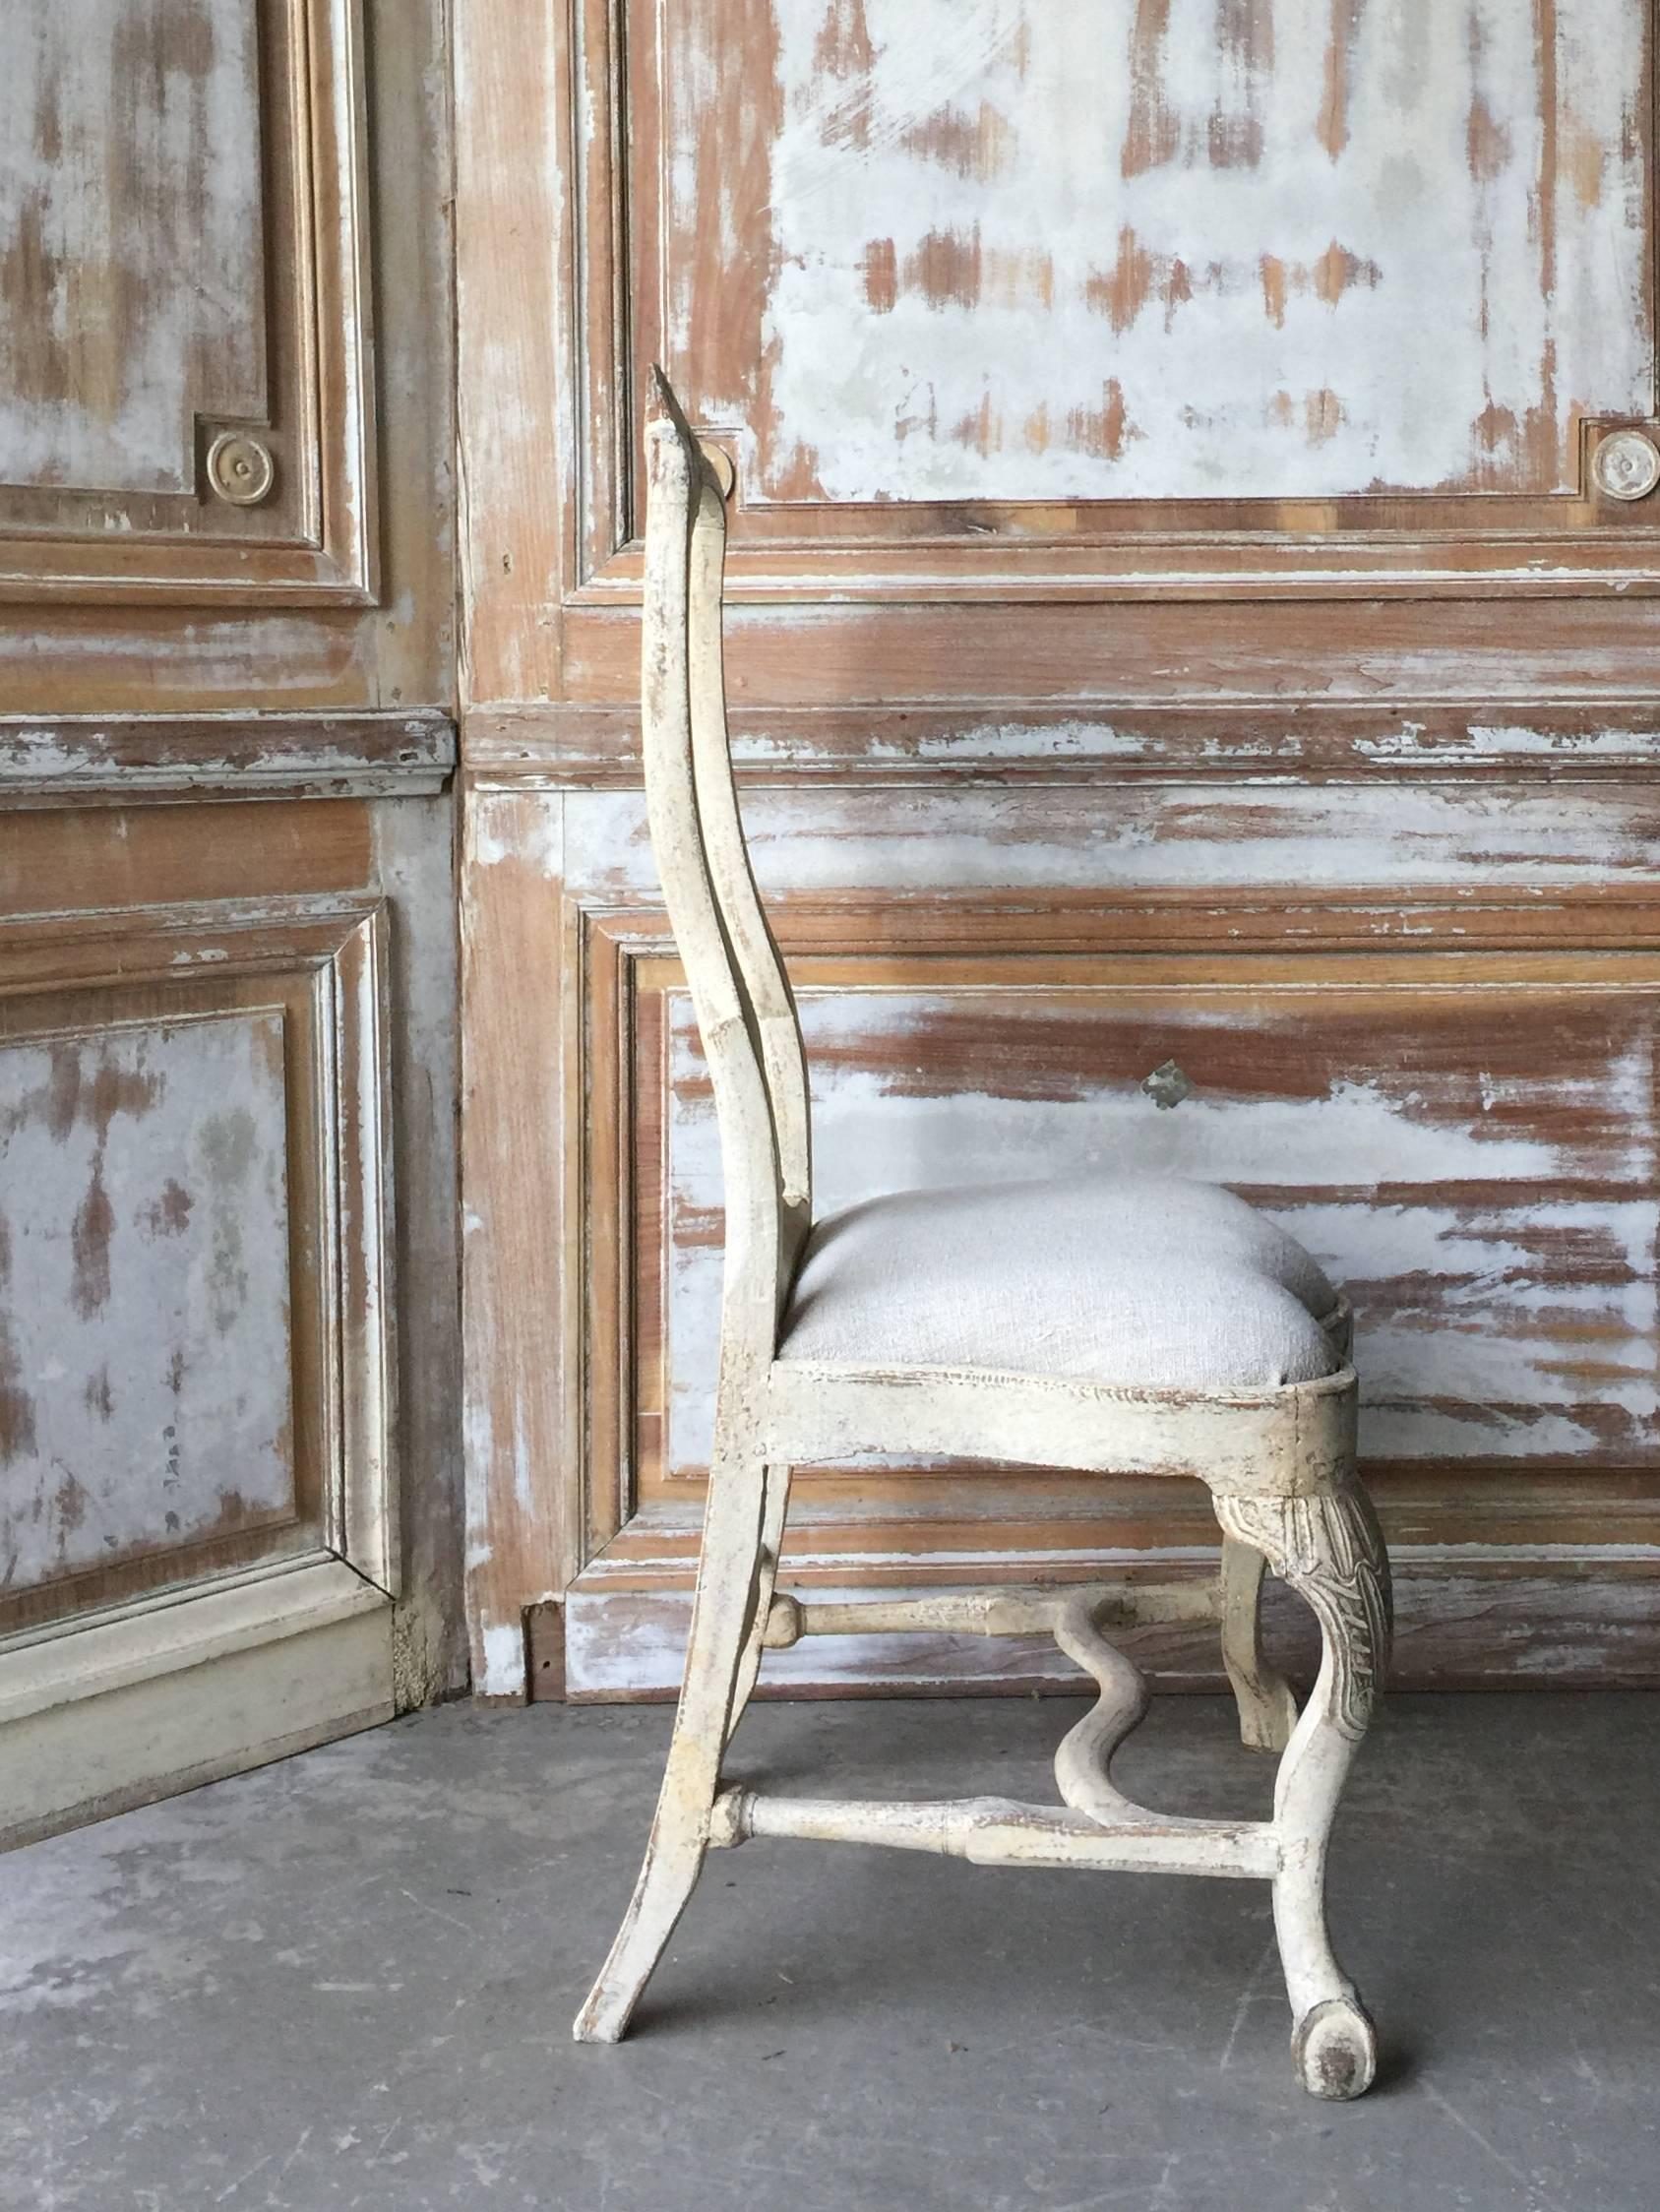 18th century Swedish chair, in Rococo period, circa 1760. Lovengly handmade with rocaille carving on the seat rails and pierced splats. Hand scraped back to traces of their original worn cream paint, Gothenburg, Sweden. Measures: Seat 14